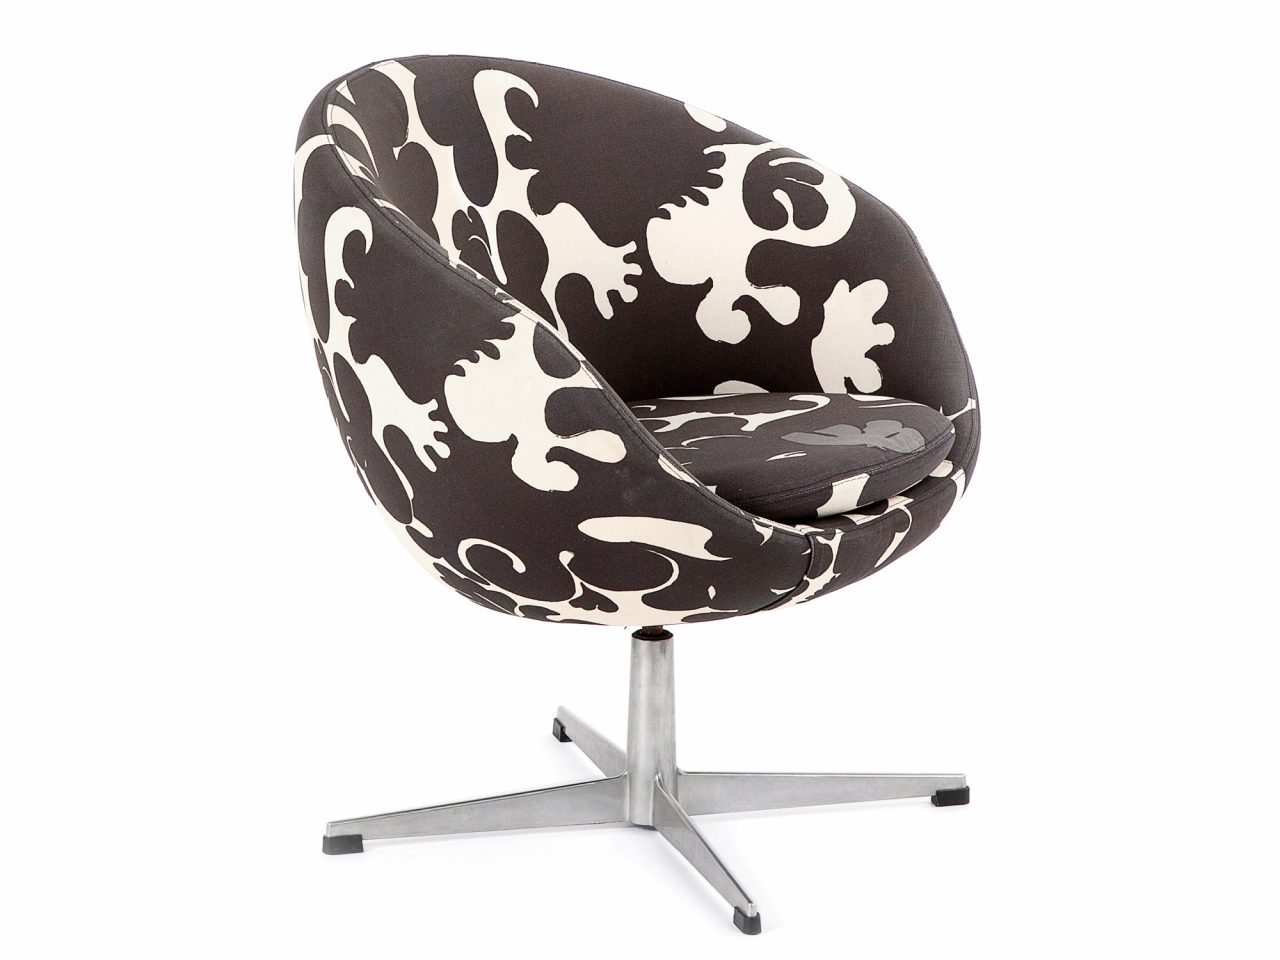 Chubby swivel chair with black and white pattern MYRTEN.